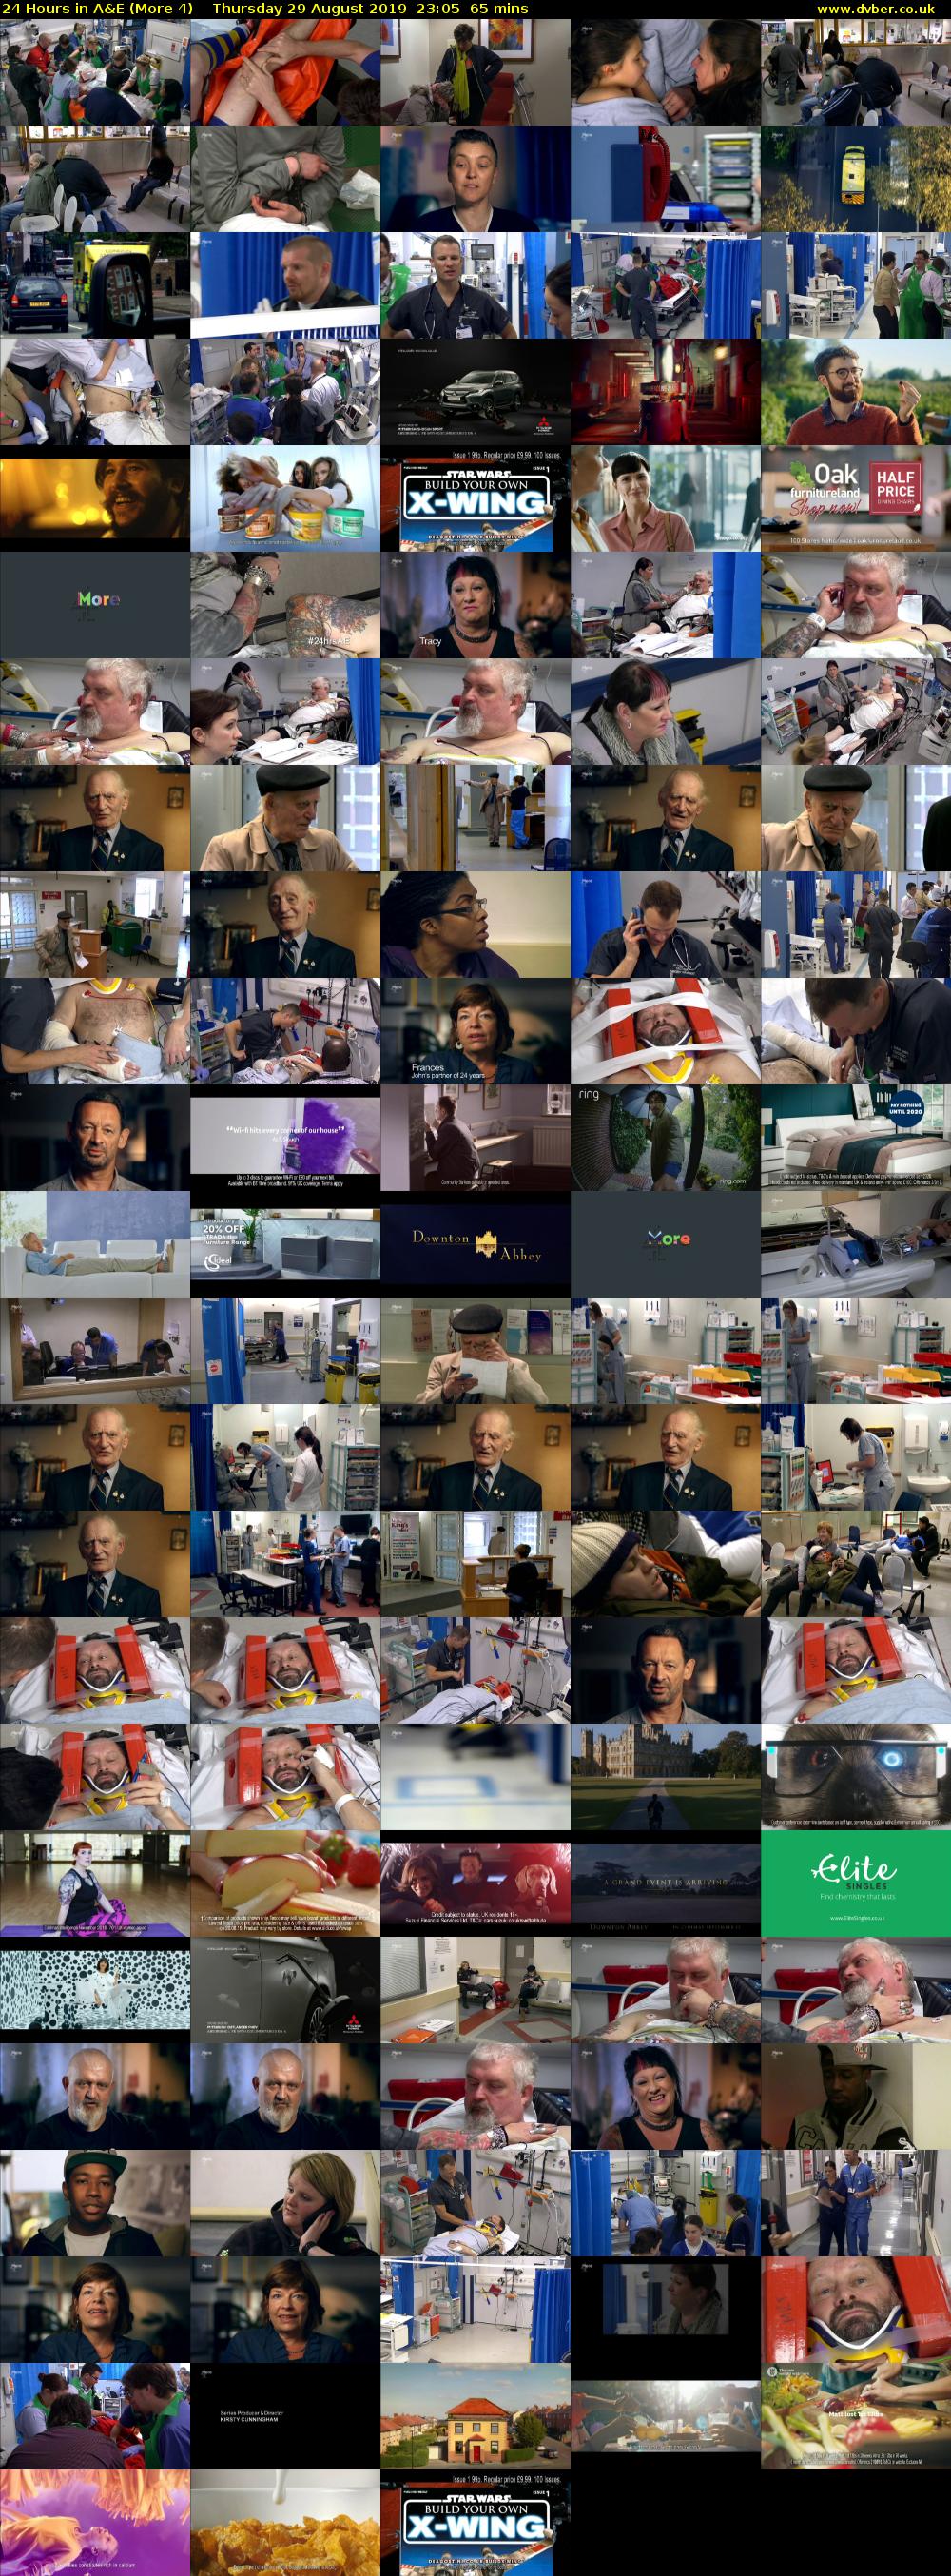 24 Hours in A&E (More 4) Thursday 29 August 2019 23:05 - 00:10